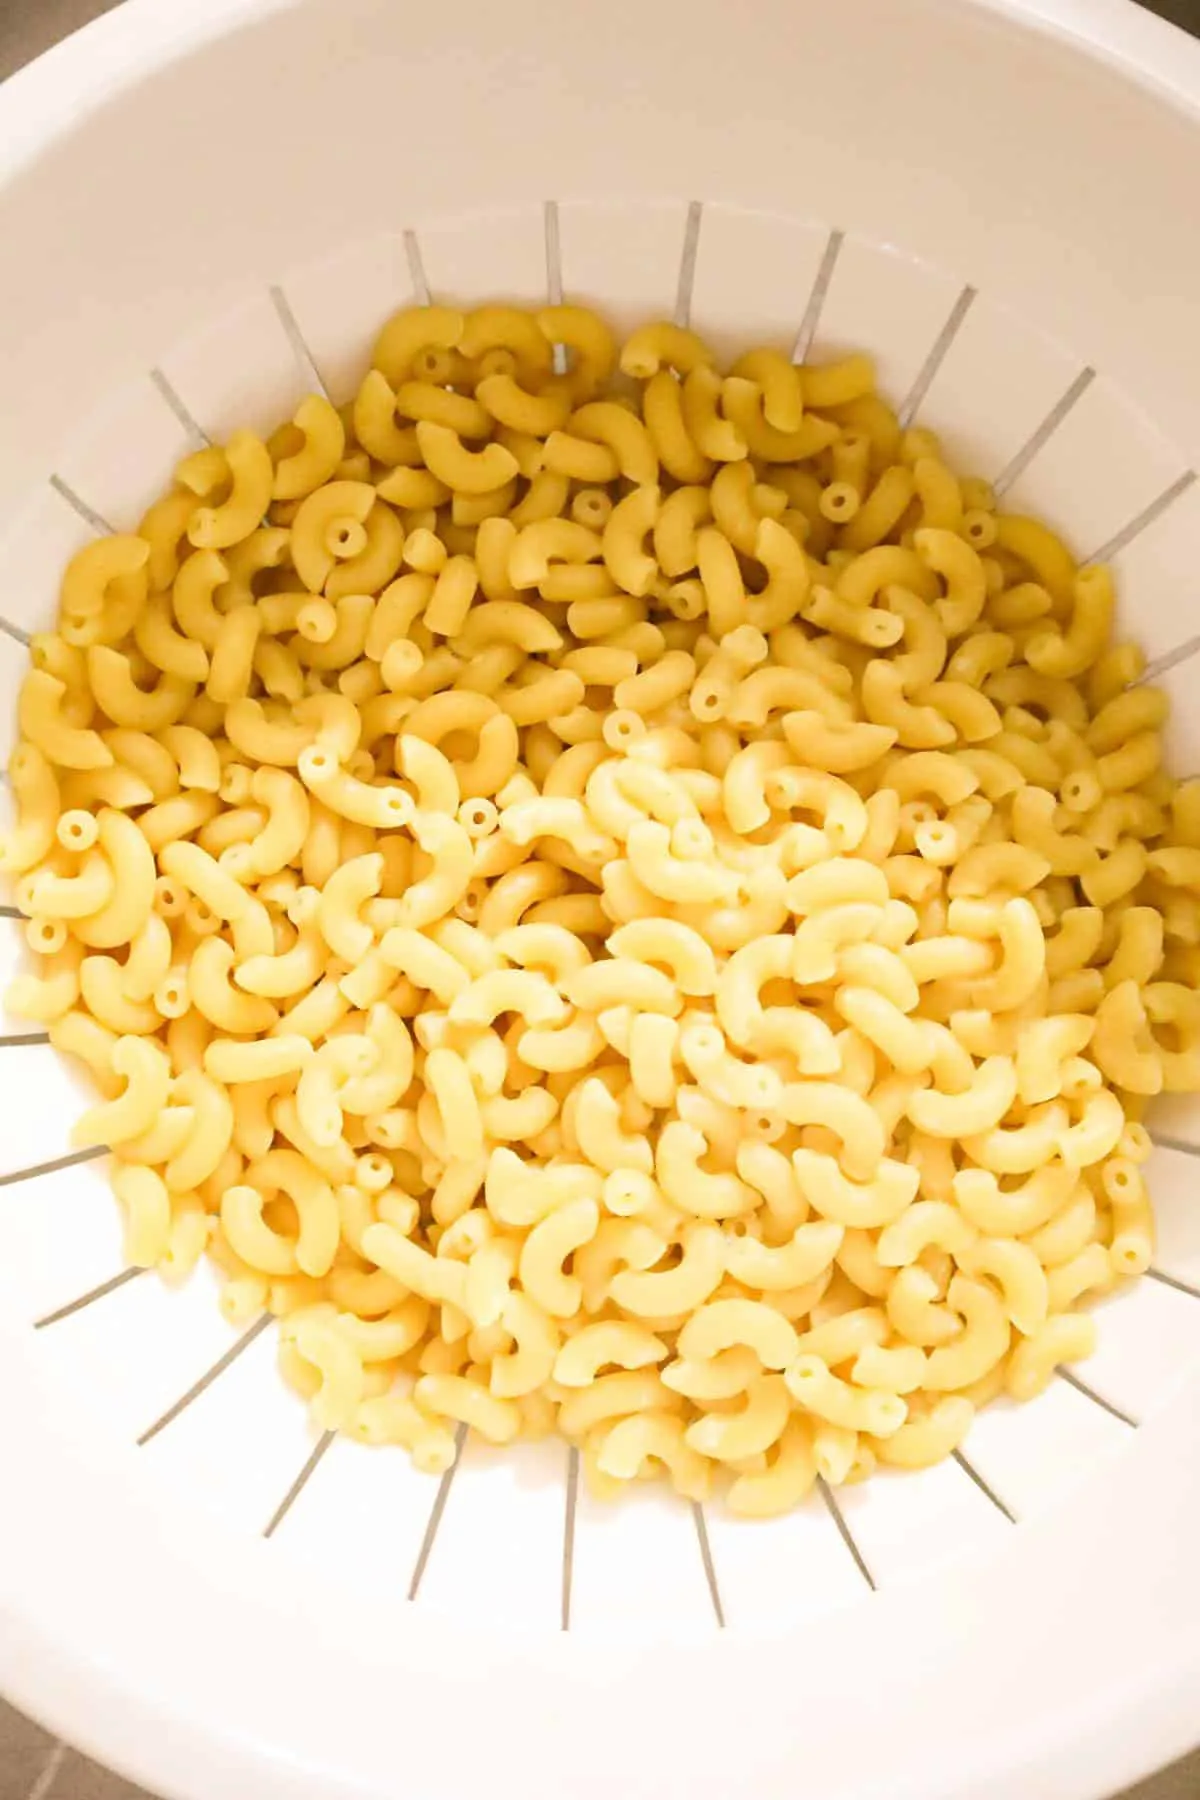 cooked macaroni noodles in a colander